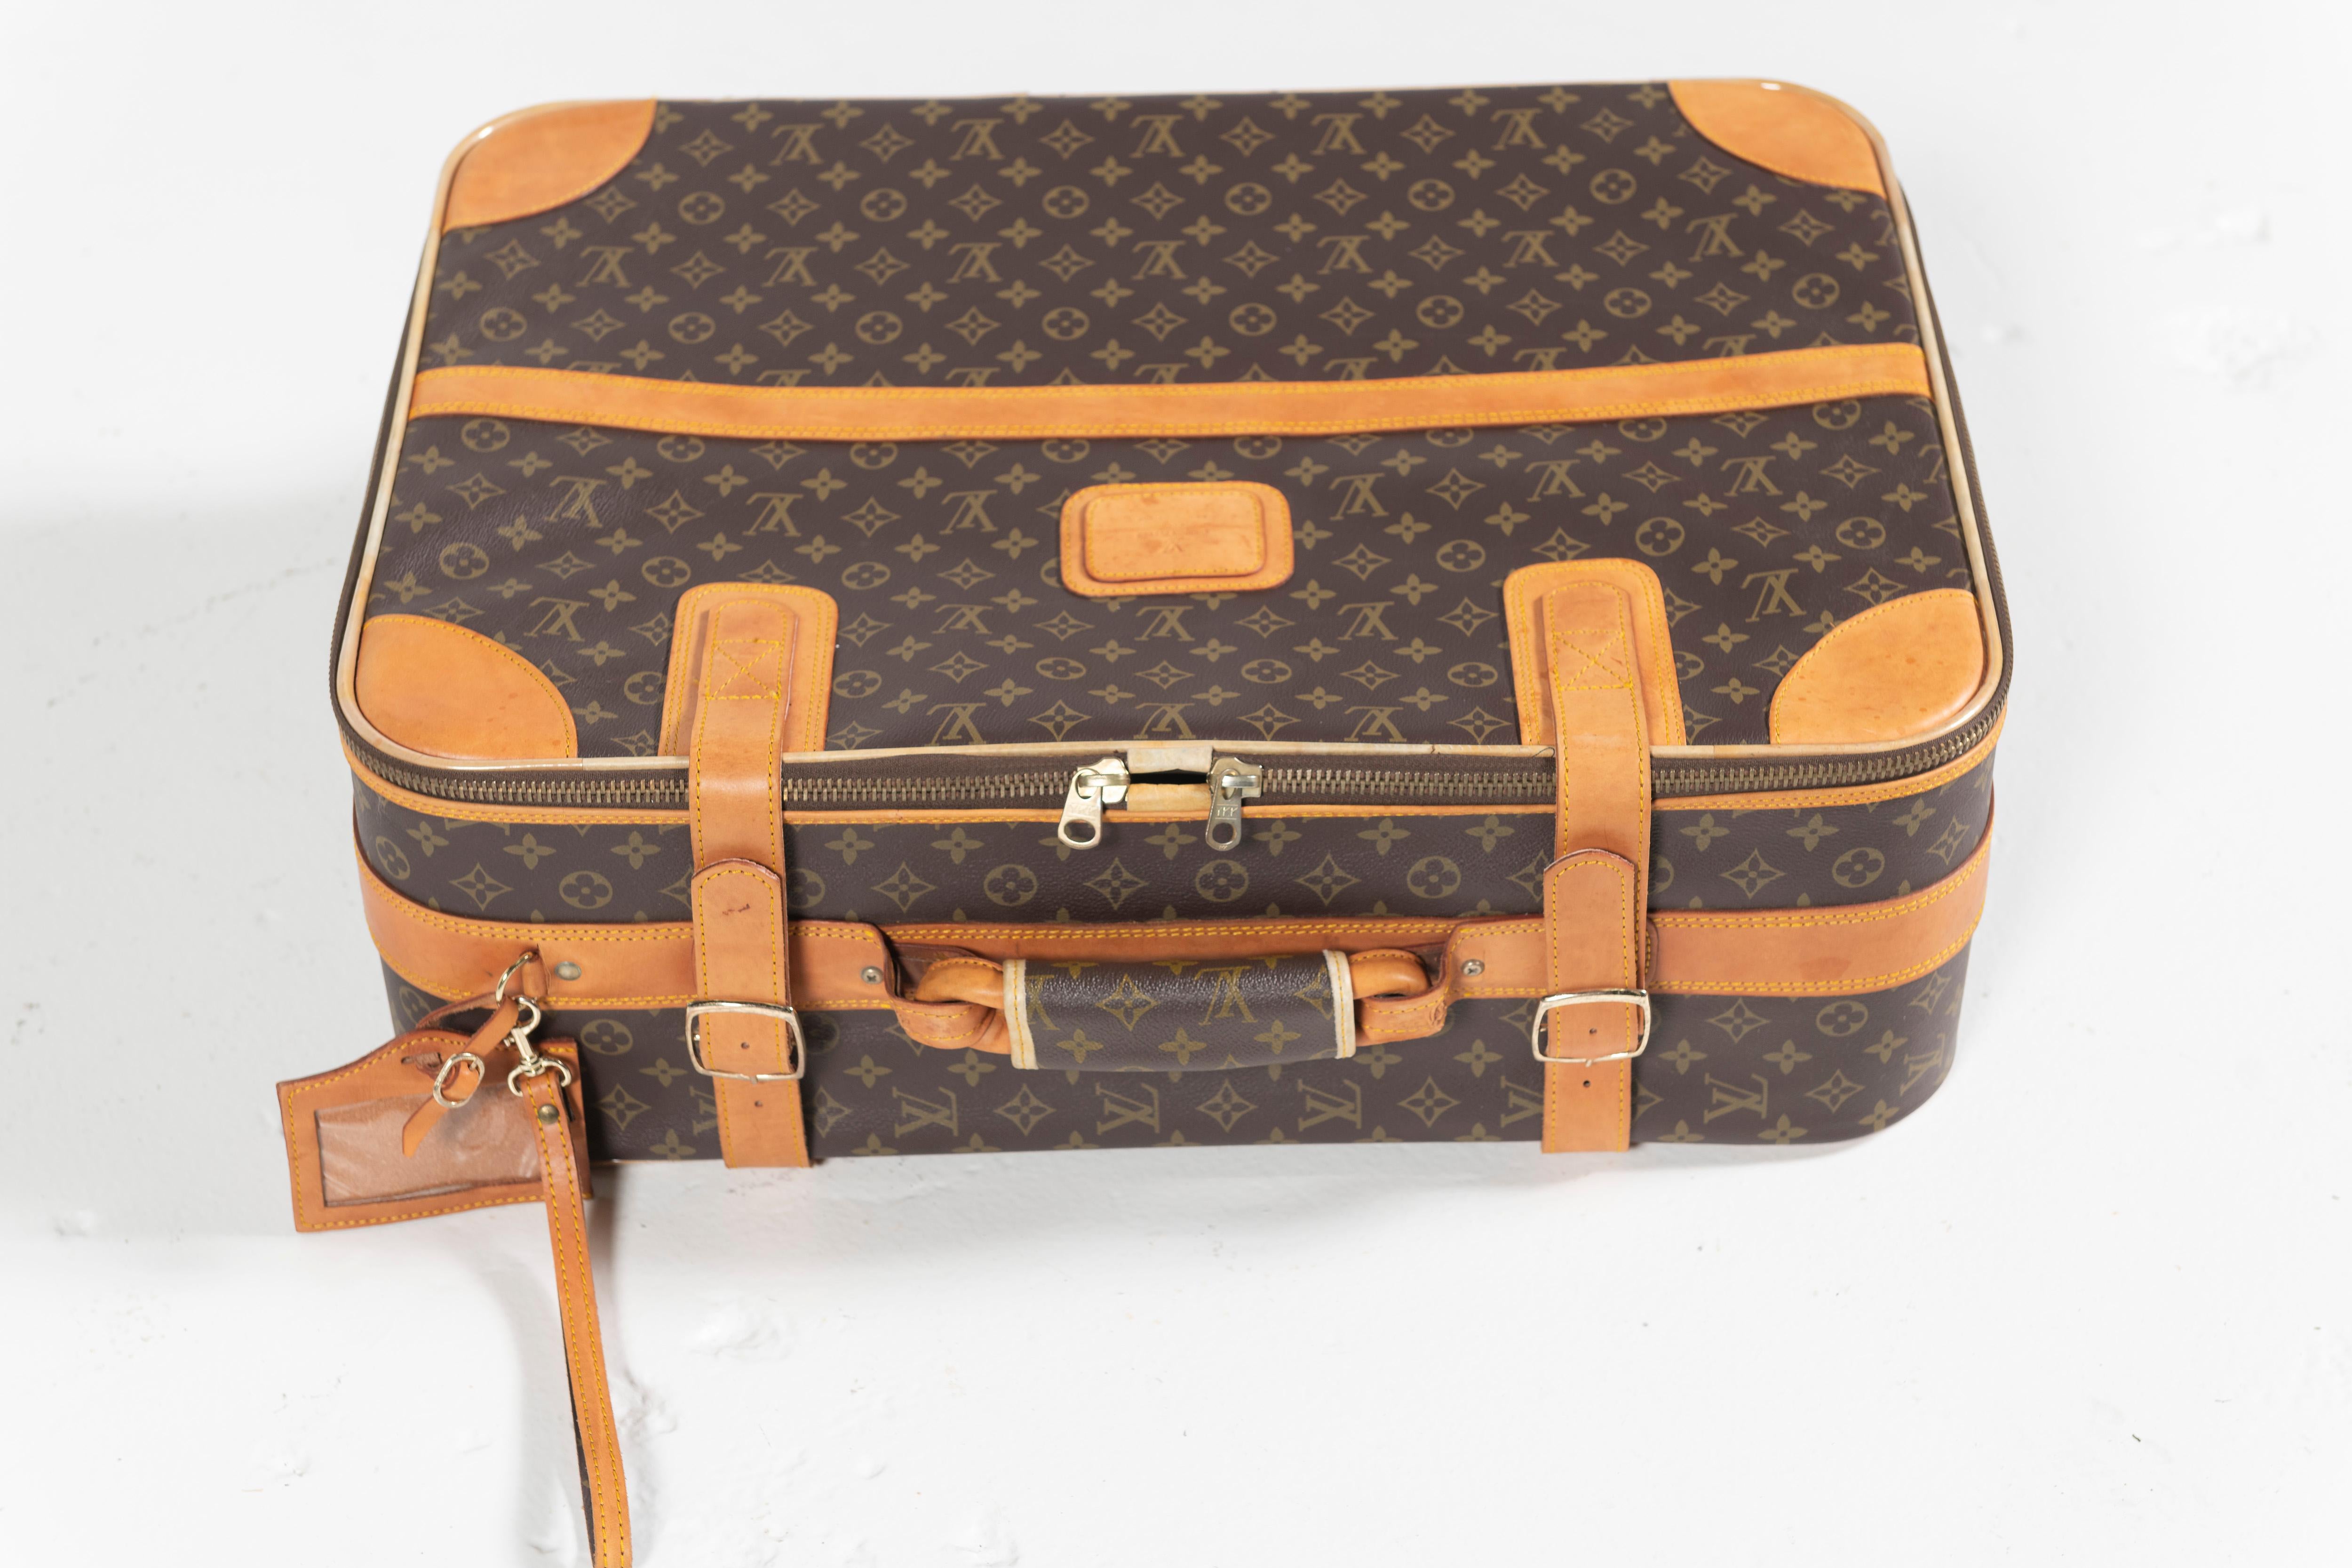 Vintage Louis Vuitton Suitcase, Monogrammed Coated Canvas, Small-Sized For Sale 3